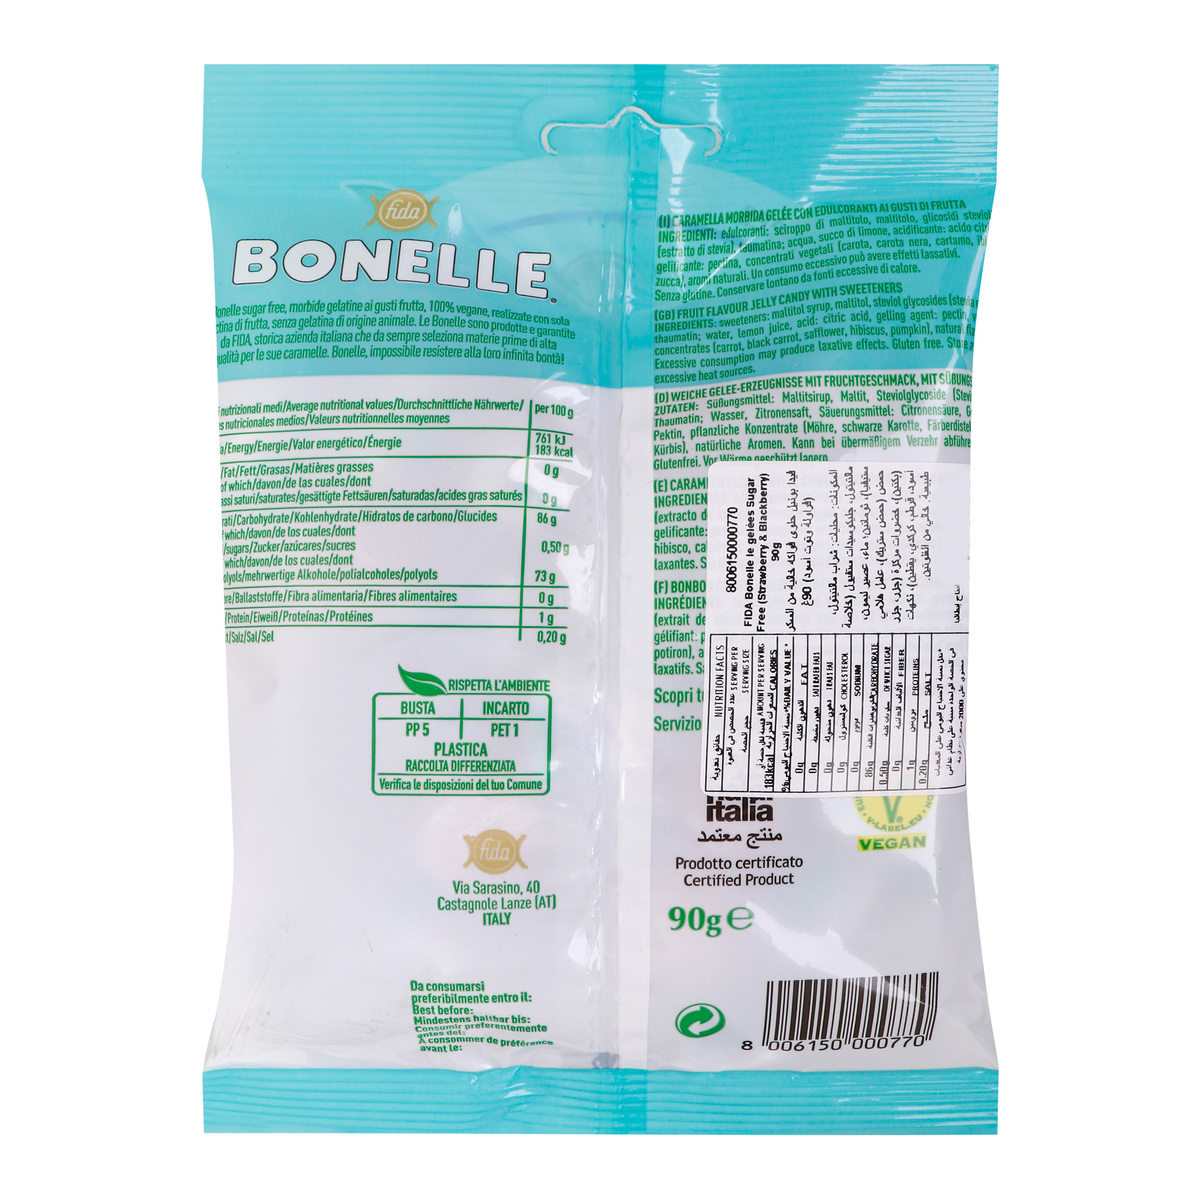 Bonelle Sugar Free Strawberry and Blackberry Flavored Jelly Candies, 90 g